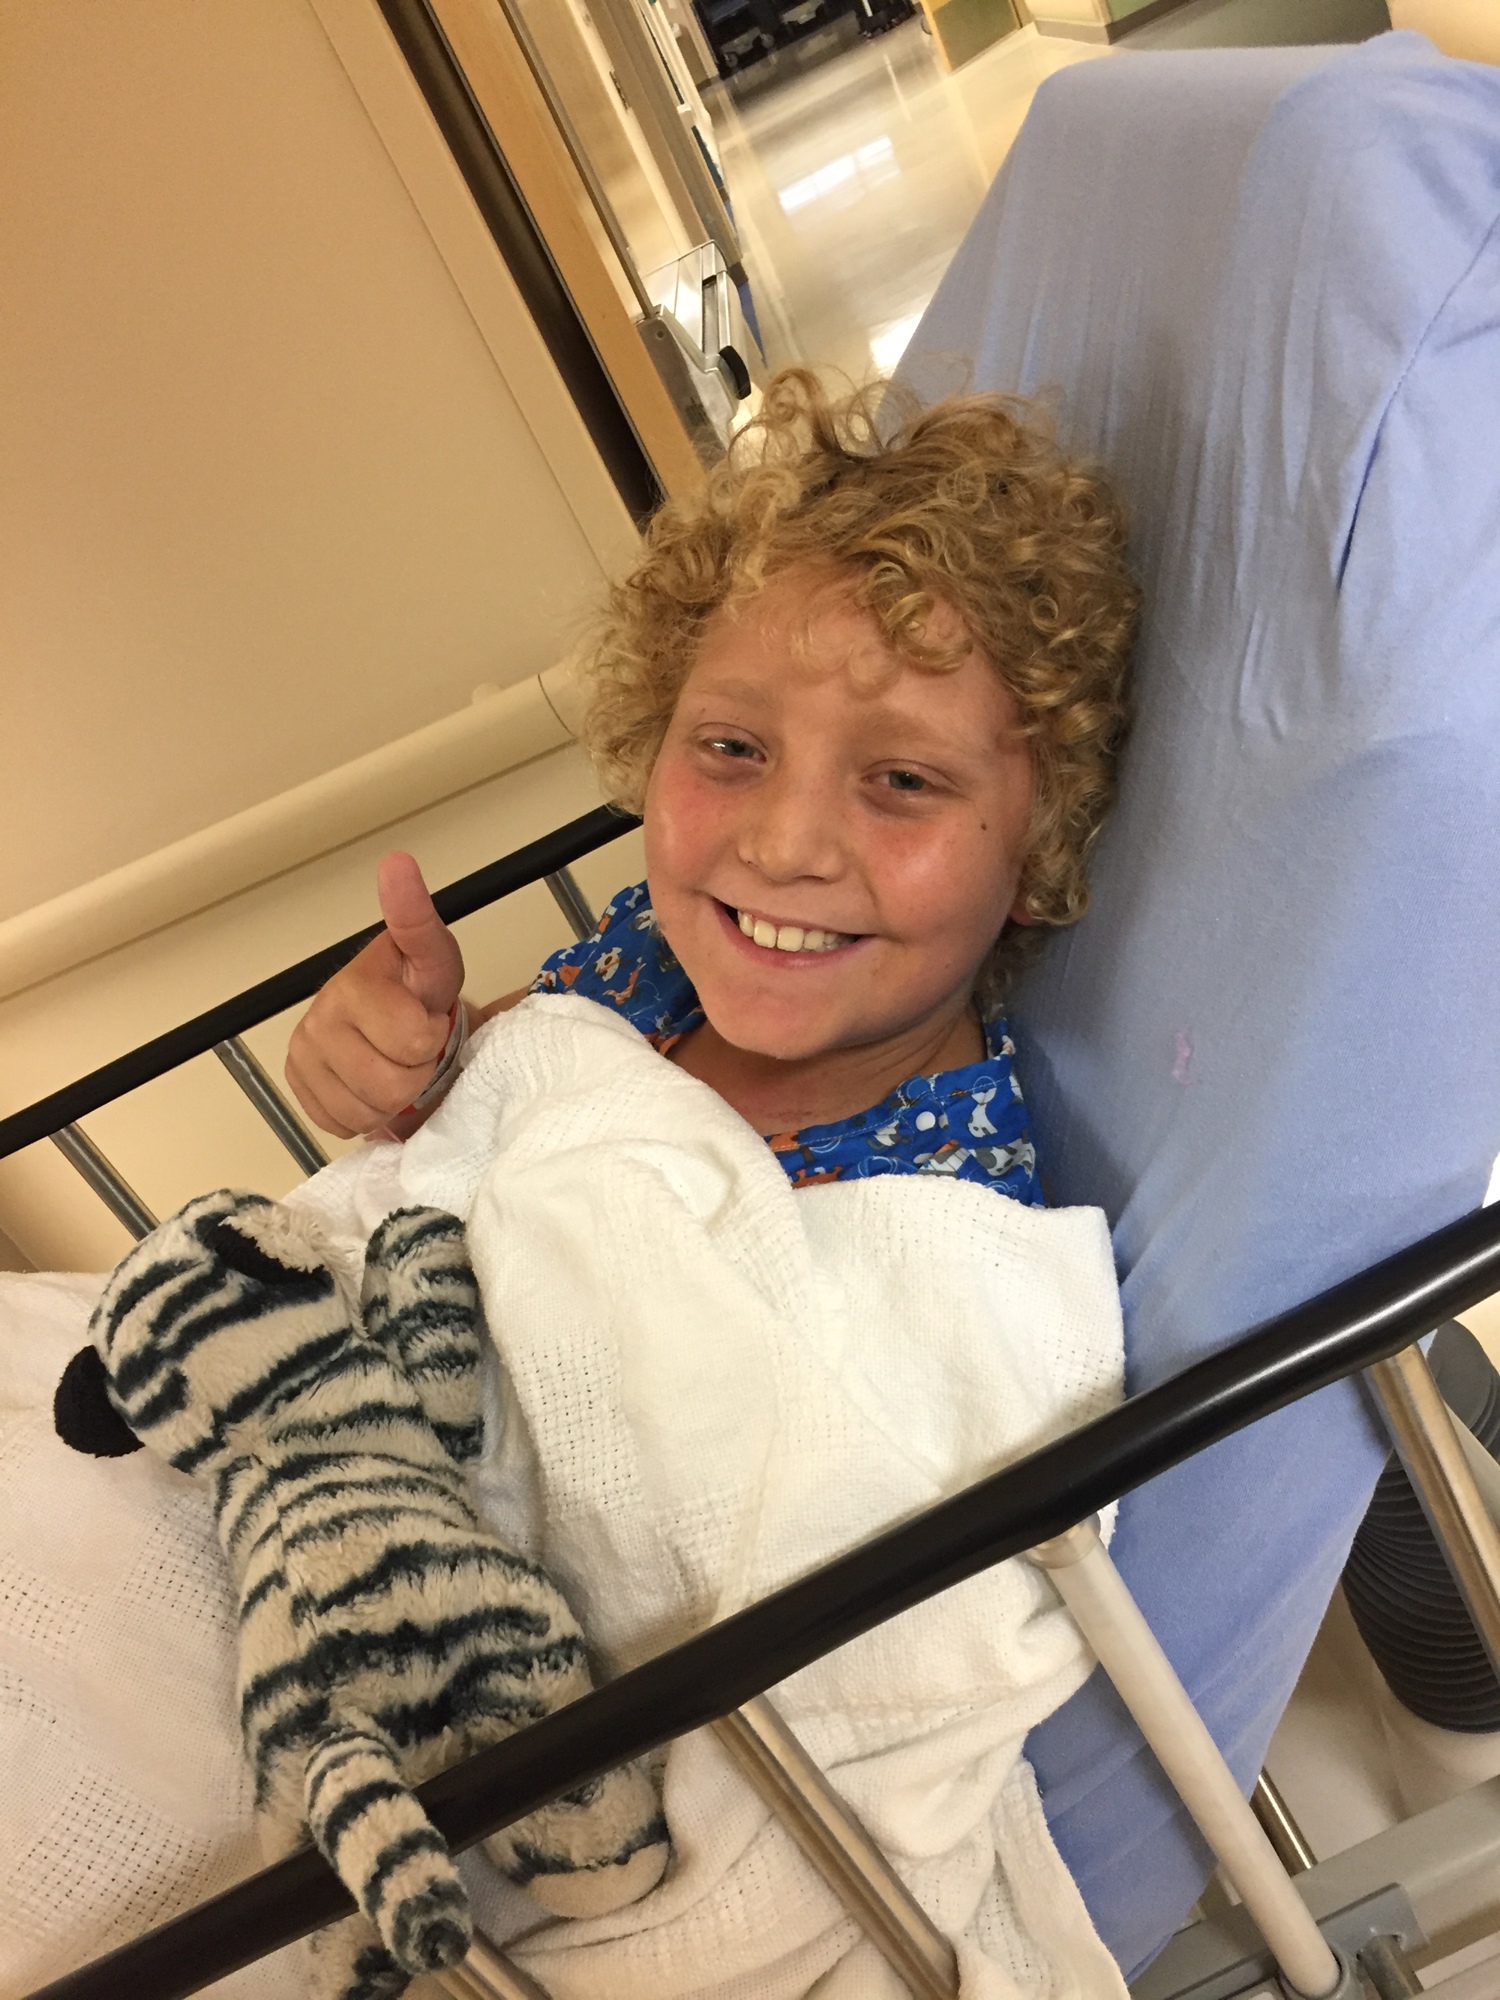 Benji kept his wide smile even as he went through chemotherapy.